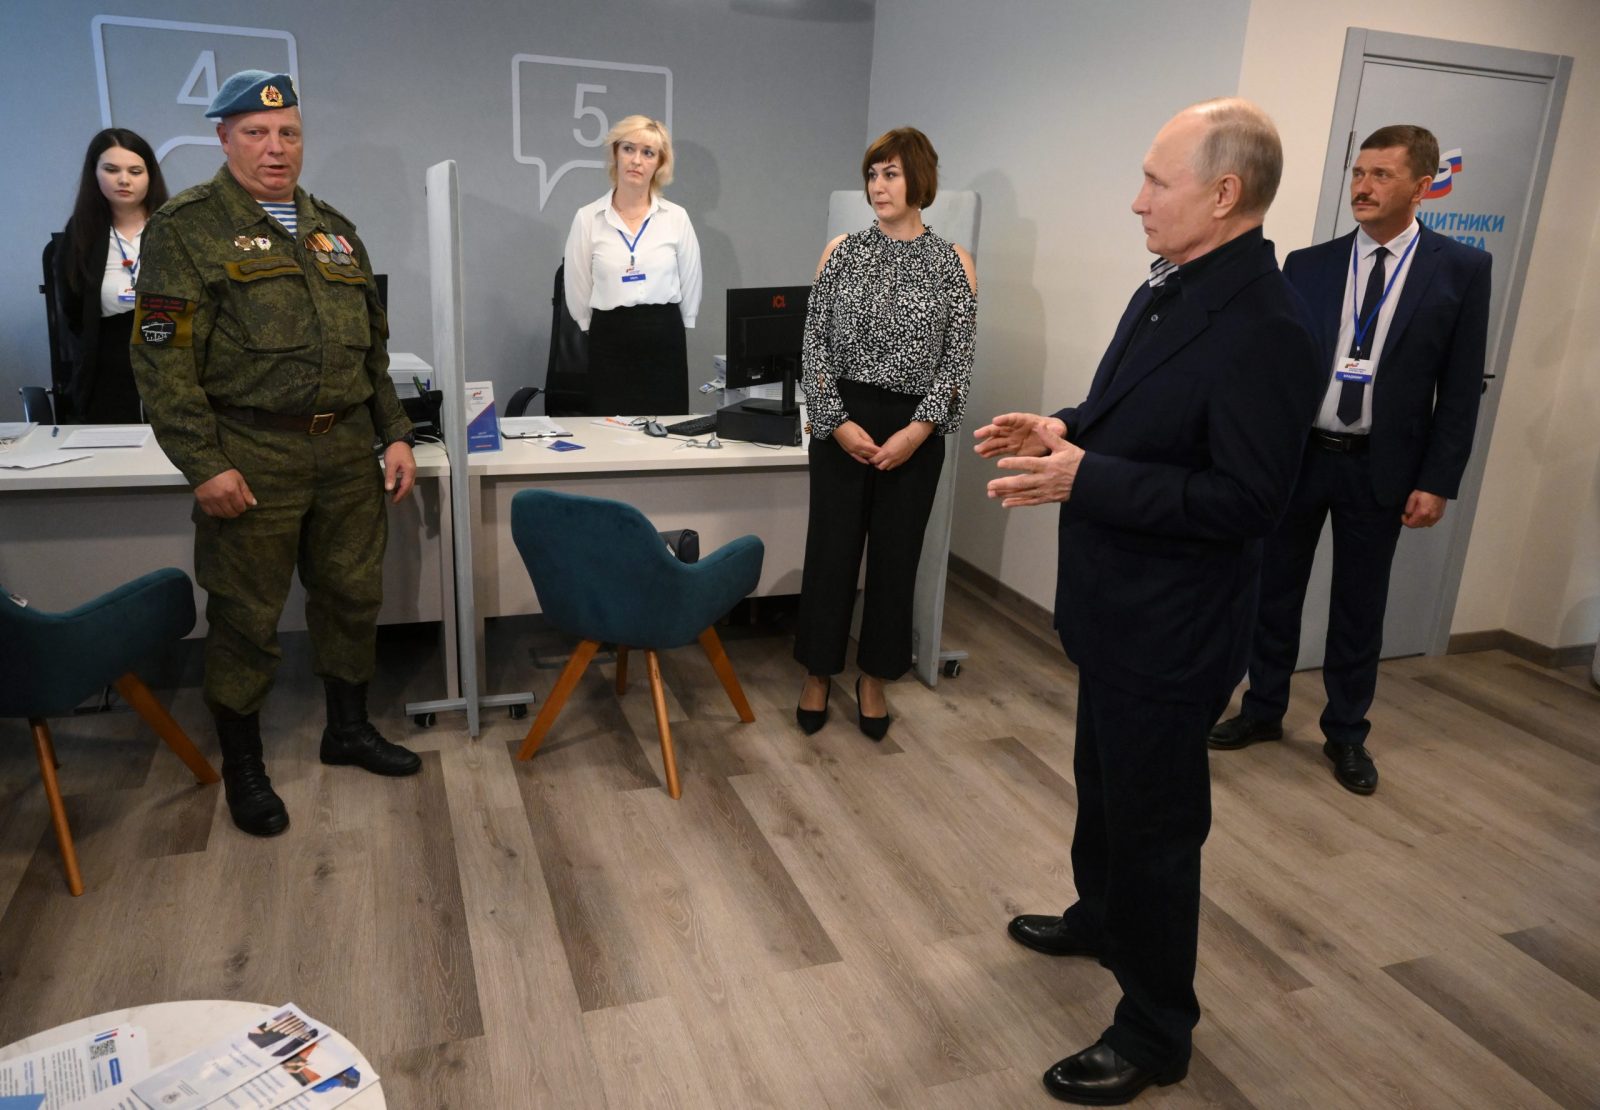 epa10875104 Russian President Vladimir Putin (R) speaks as he visits the Vozvrashchenie (Return) Center, a support center for participants of the special military operation and their families, in Veliky Novgorod, Russia, 21 September 2023. Russian President arrived in Veliky Novgorod to hold a meeting of the State Council dedicated to the development of the labor market. The Return Center, which was opened on 01 June 2023, provides assistance to SVO (Special military operation) participants, veterans and disabled combat veterans and members of their families, family members of deceased participants and combat veterans.  EPA/ILYA PITALEV/SPUTNIK/KREMLIN POOL / POOL MANDATORY CREDIT